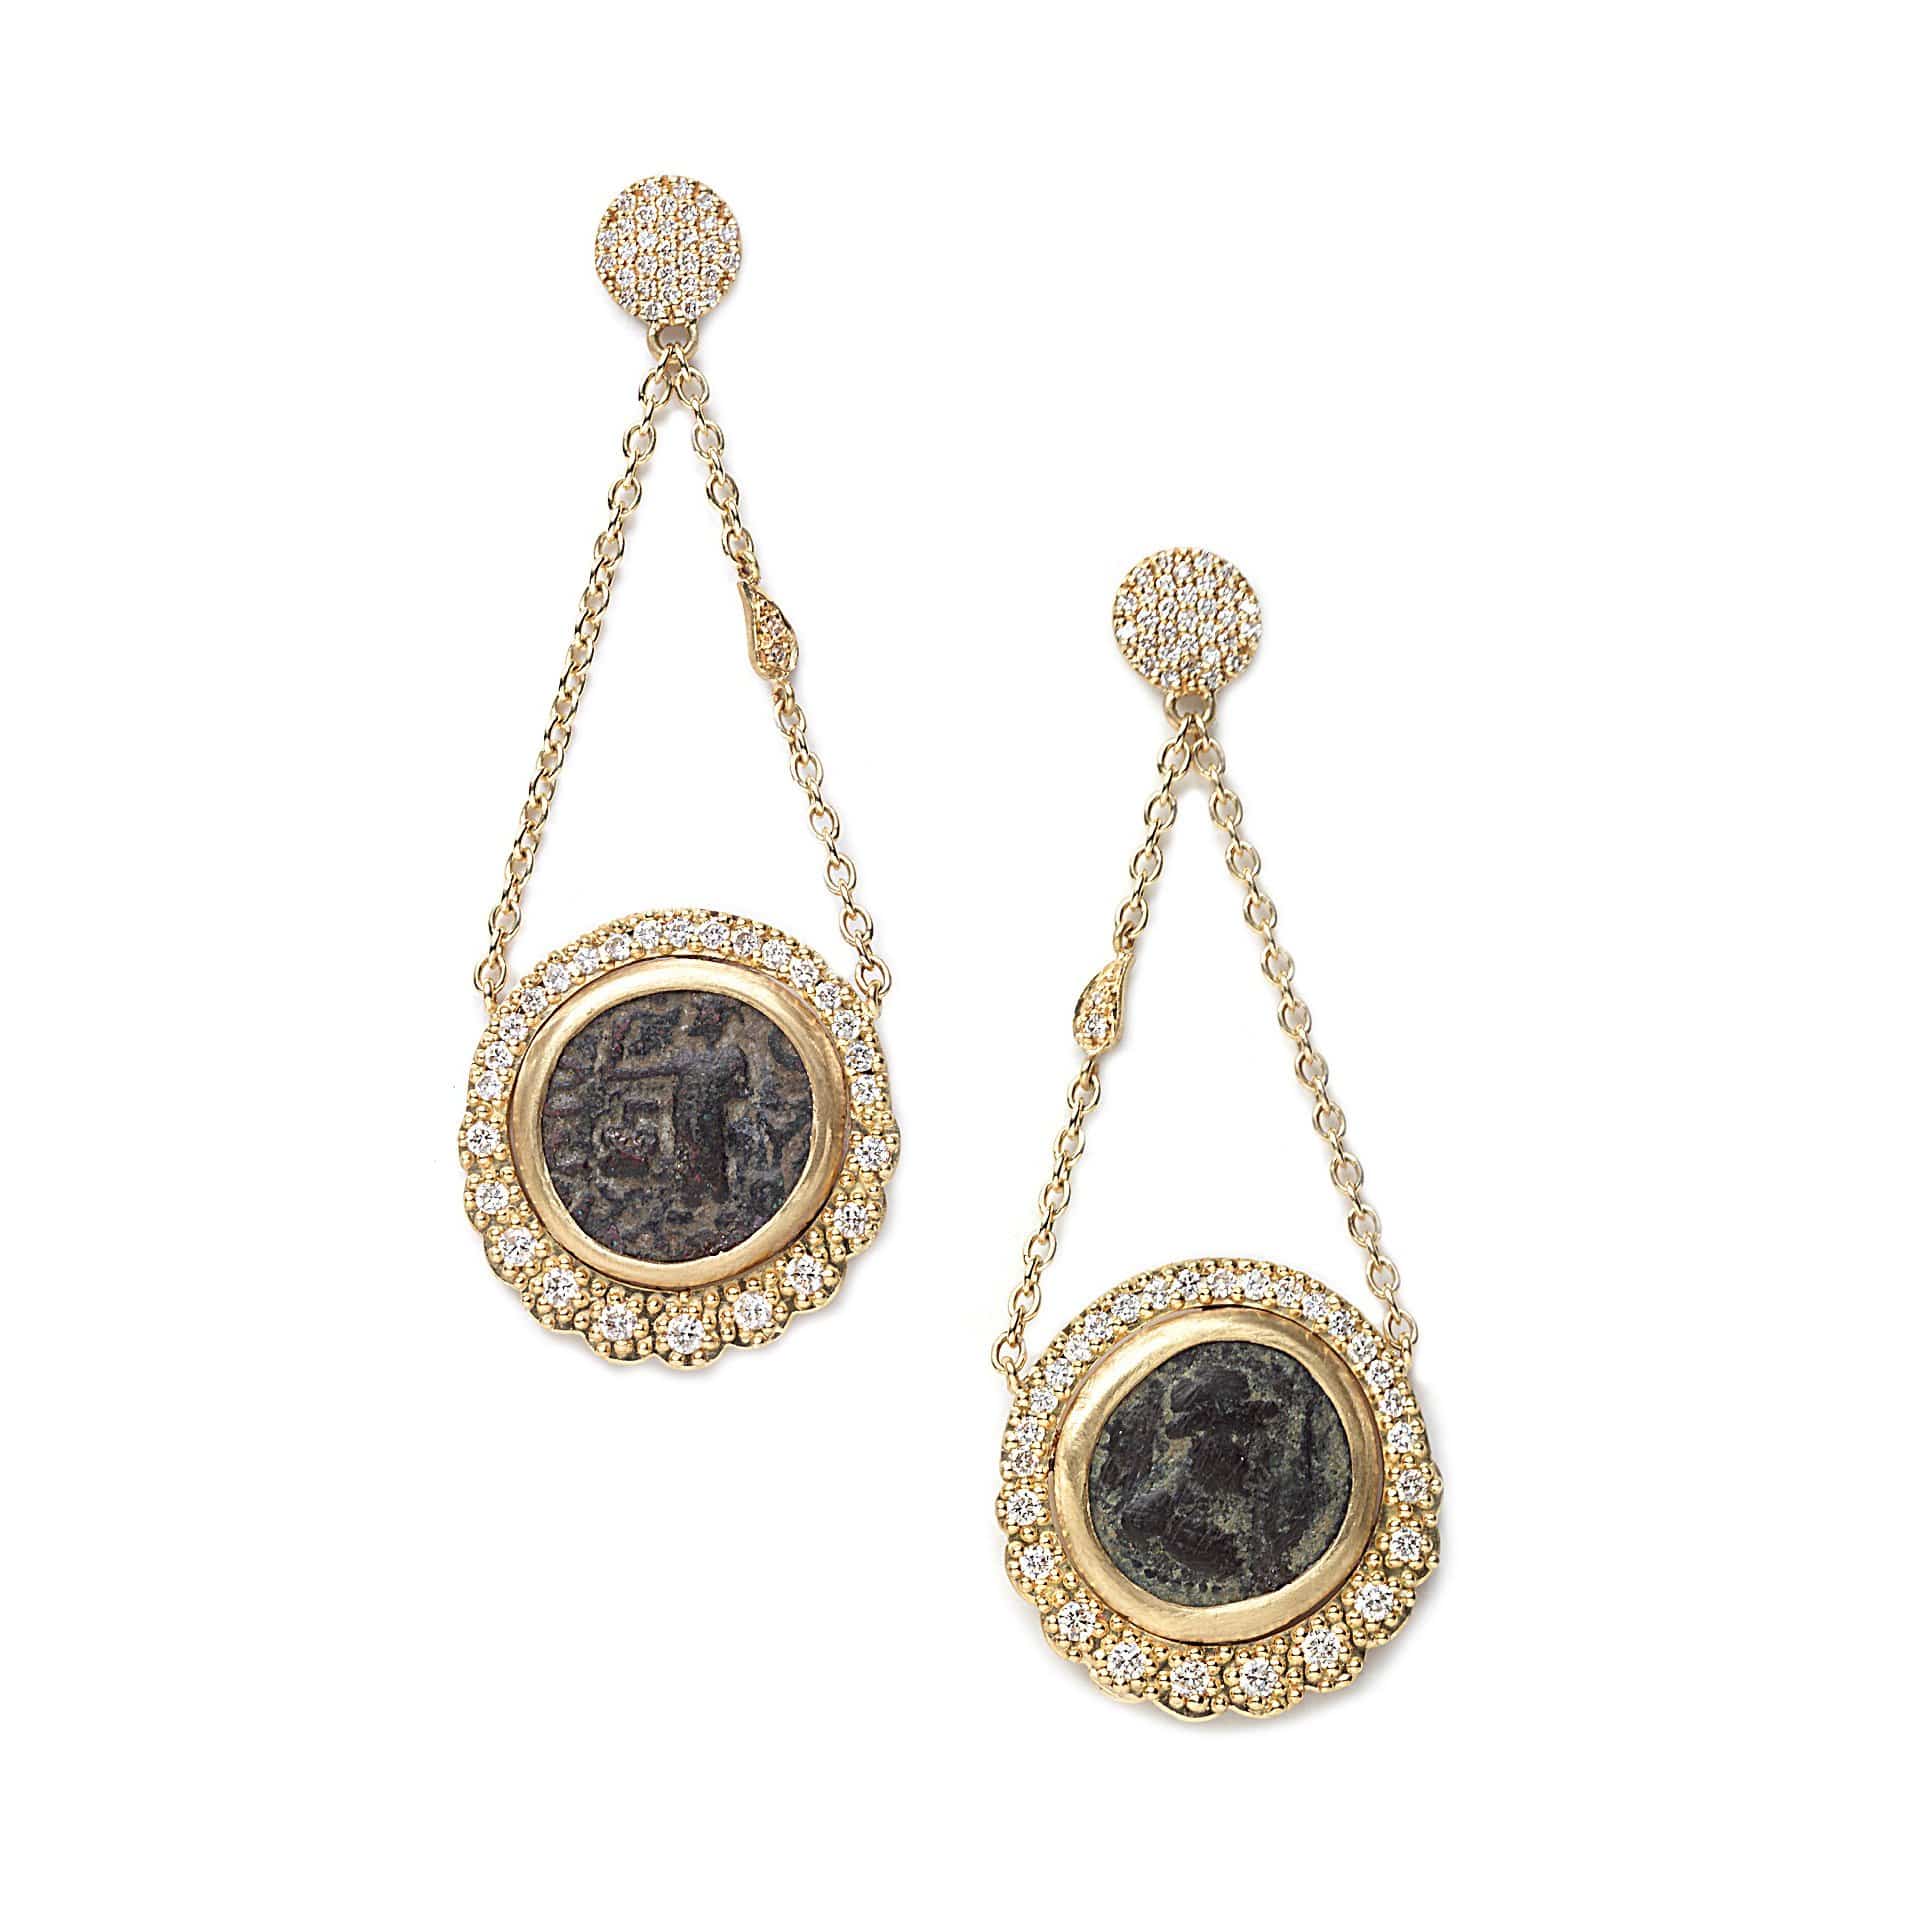 Antiquity Ancient Kushan Coin Earrings - Coomi